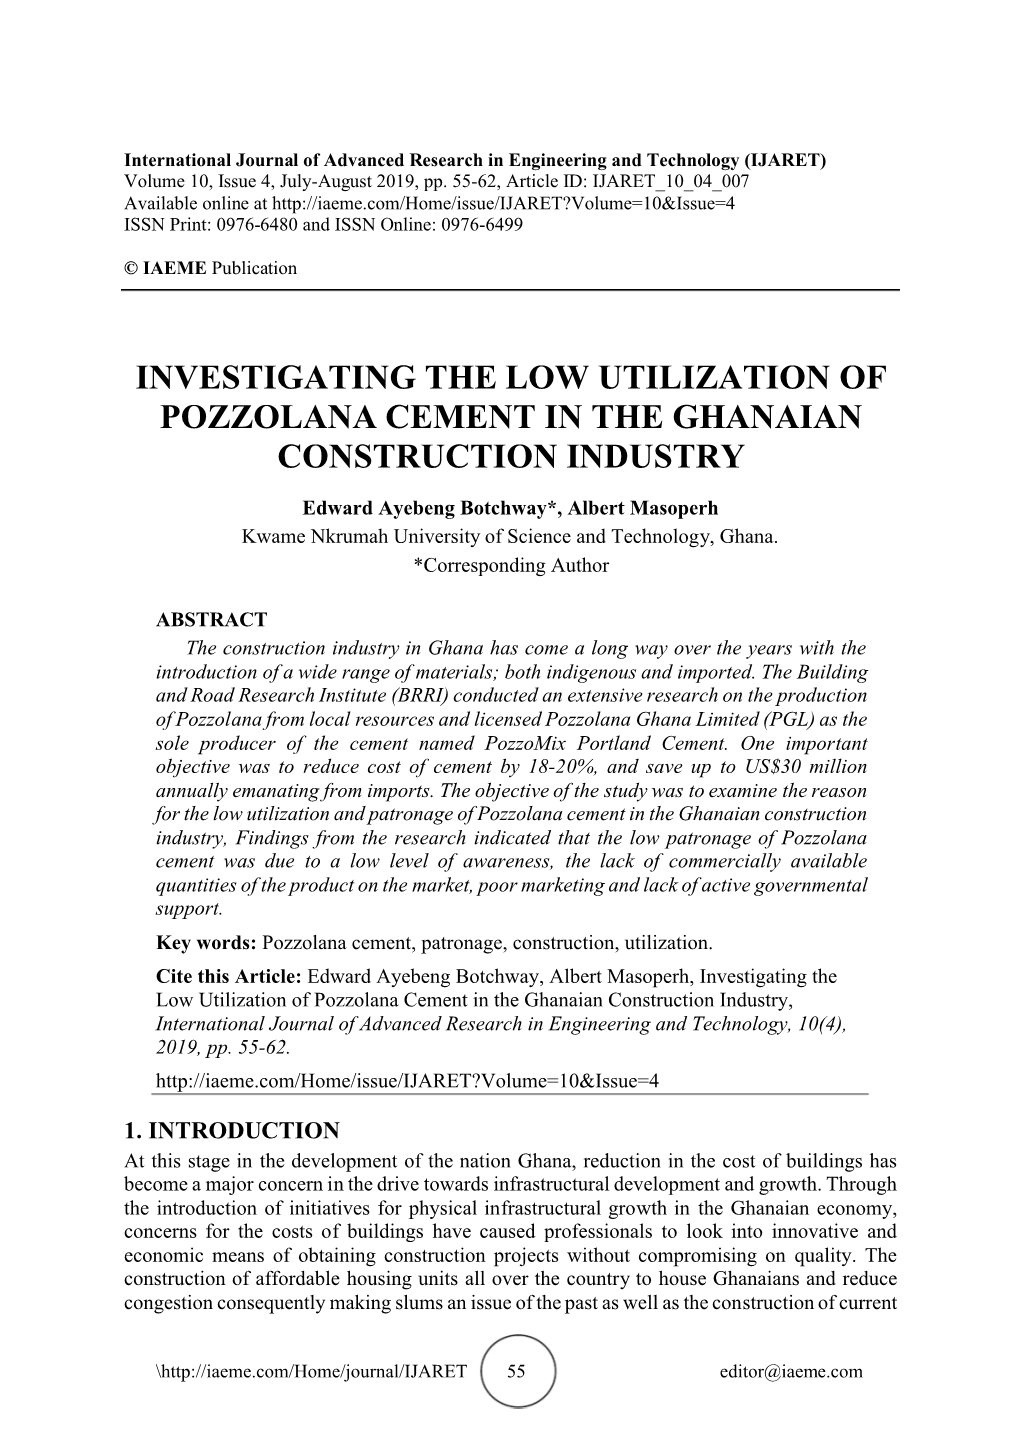 Investigating the Low Utilization of Pozzolana Cement in the Ghanaian Construction Industry